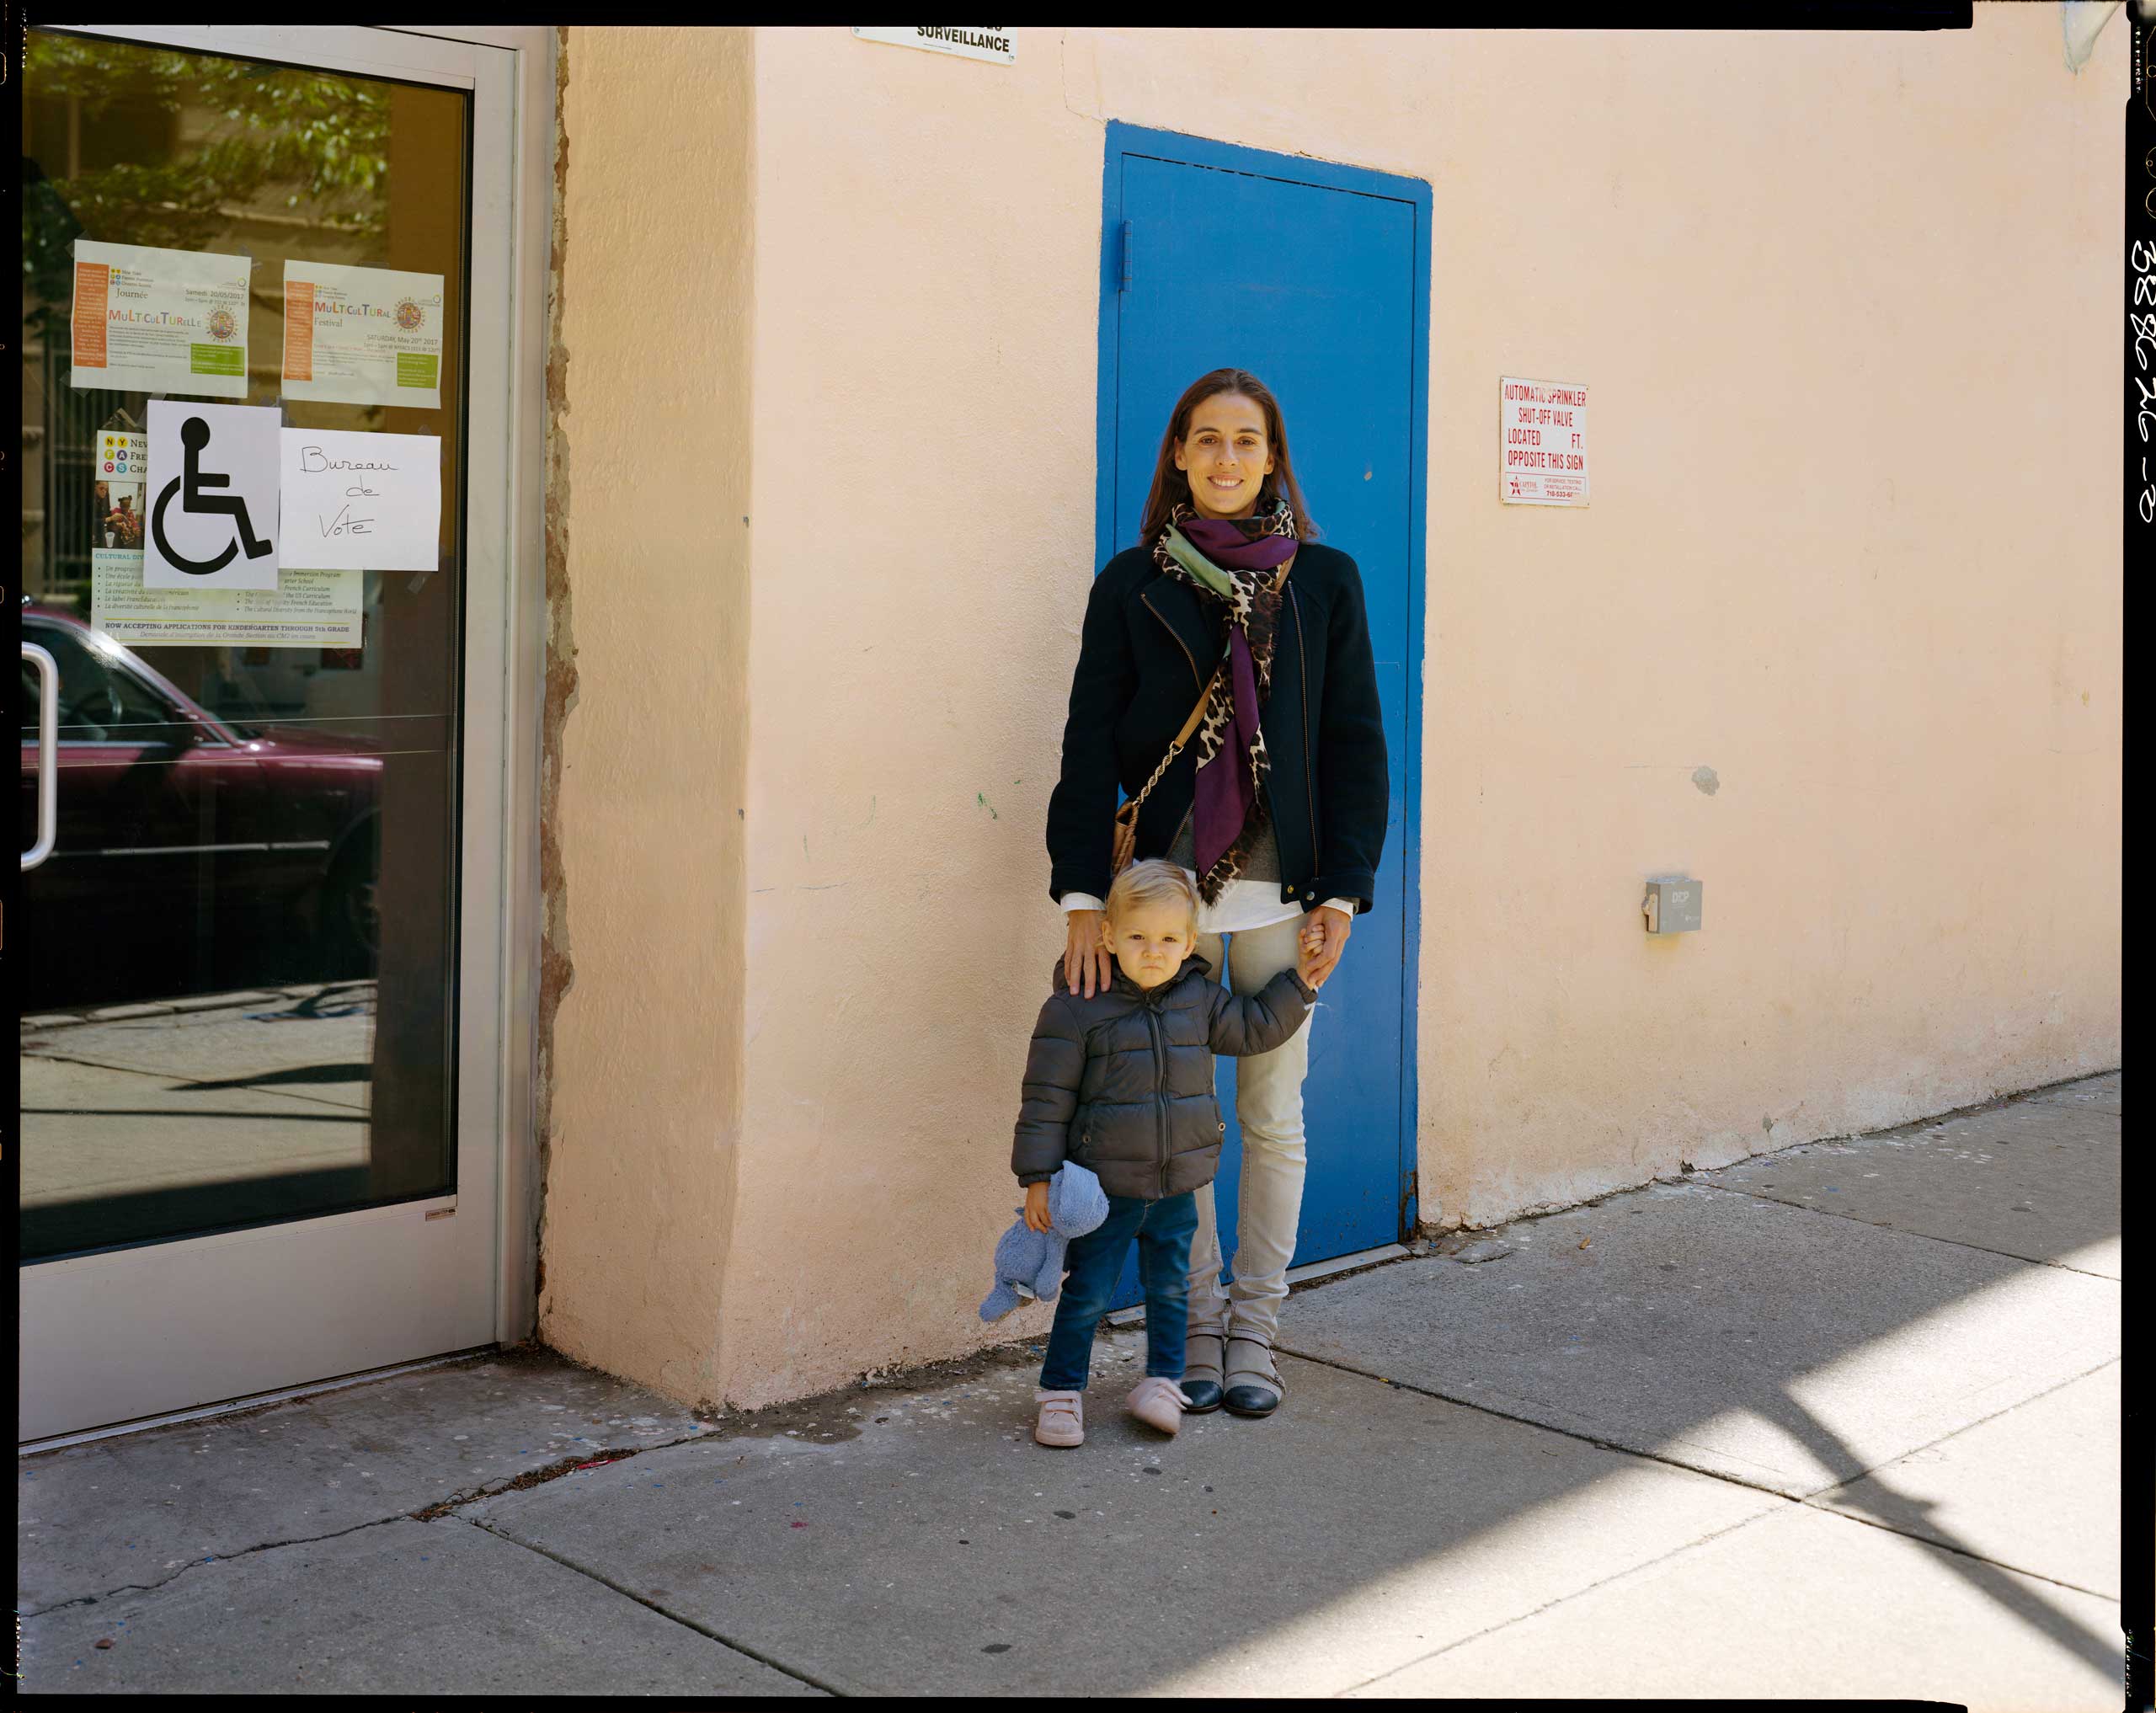 Translation of caption from Liberation: May 6, 10:15 am, Harlem. Maïa Dibie, accompanied by her daughter Inna, voted this morning at the polling station of the French American Charter School, which offers bilingual education (half in French, half in English) in northern Manhattan. Maïa is director of an artist’s studio, she has lived here since 2003. Among the French voters of New York, Emmanuel Macron received 94.7% of the votes in the second round of the presidential elections.